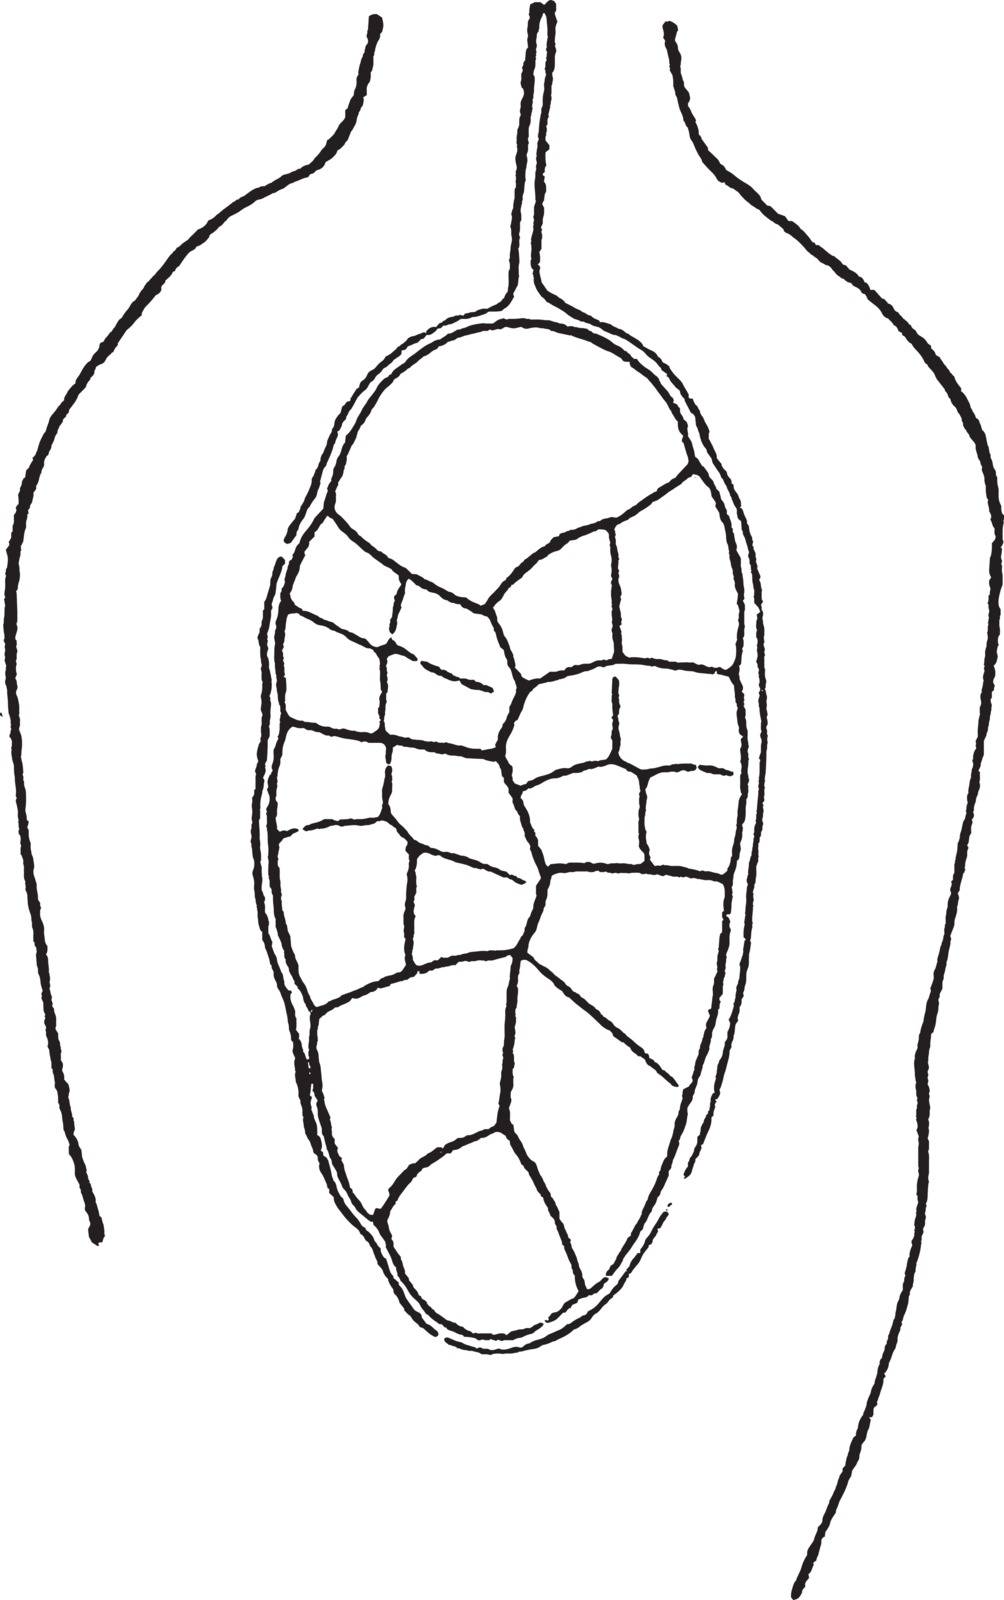 This is an image of Longitudinal section of the very young sporogonium enclosed in the archegonial wall of Funaria hygrometrica which grows on moist shady, damp soil, vintage line drawing or engraving illustration.